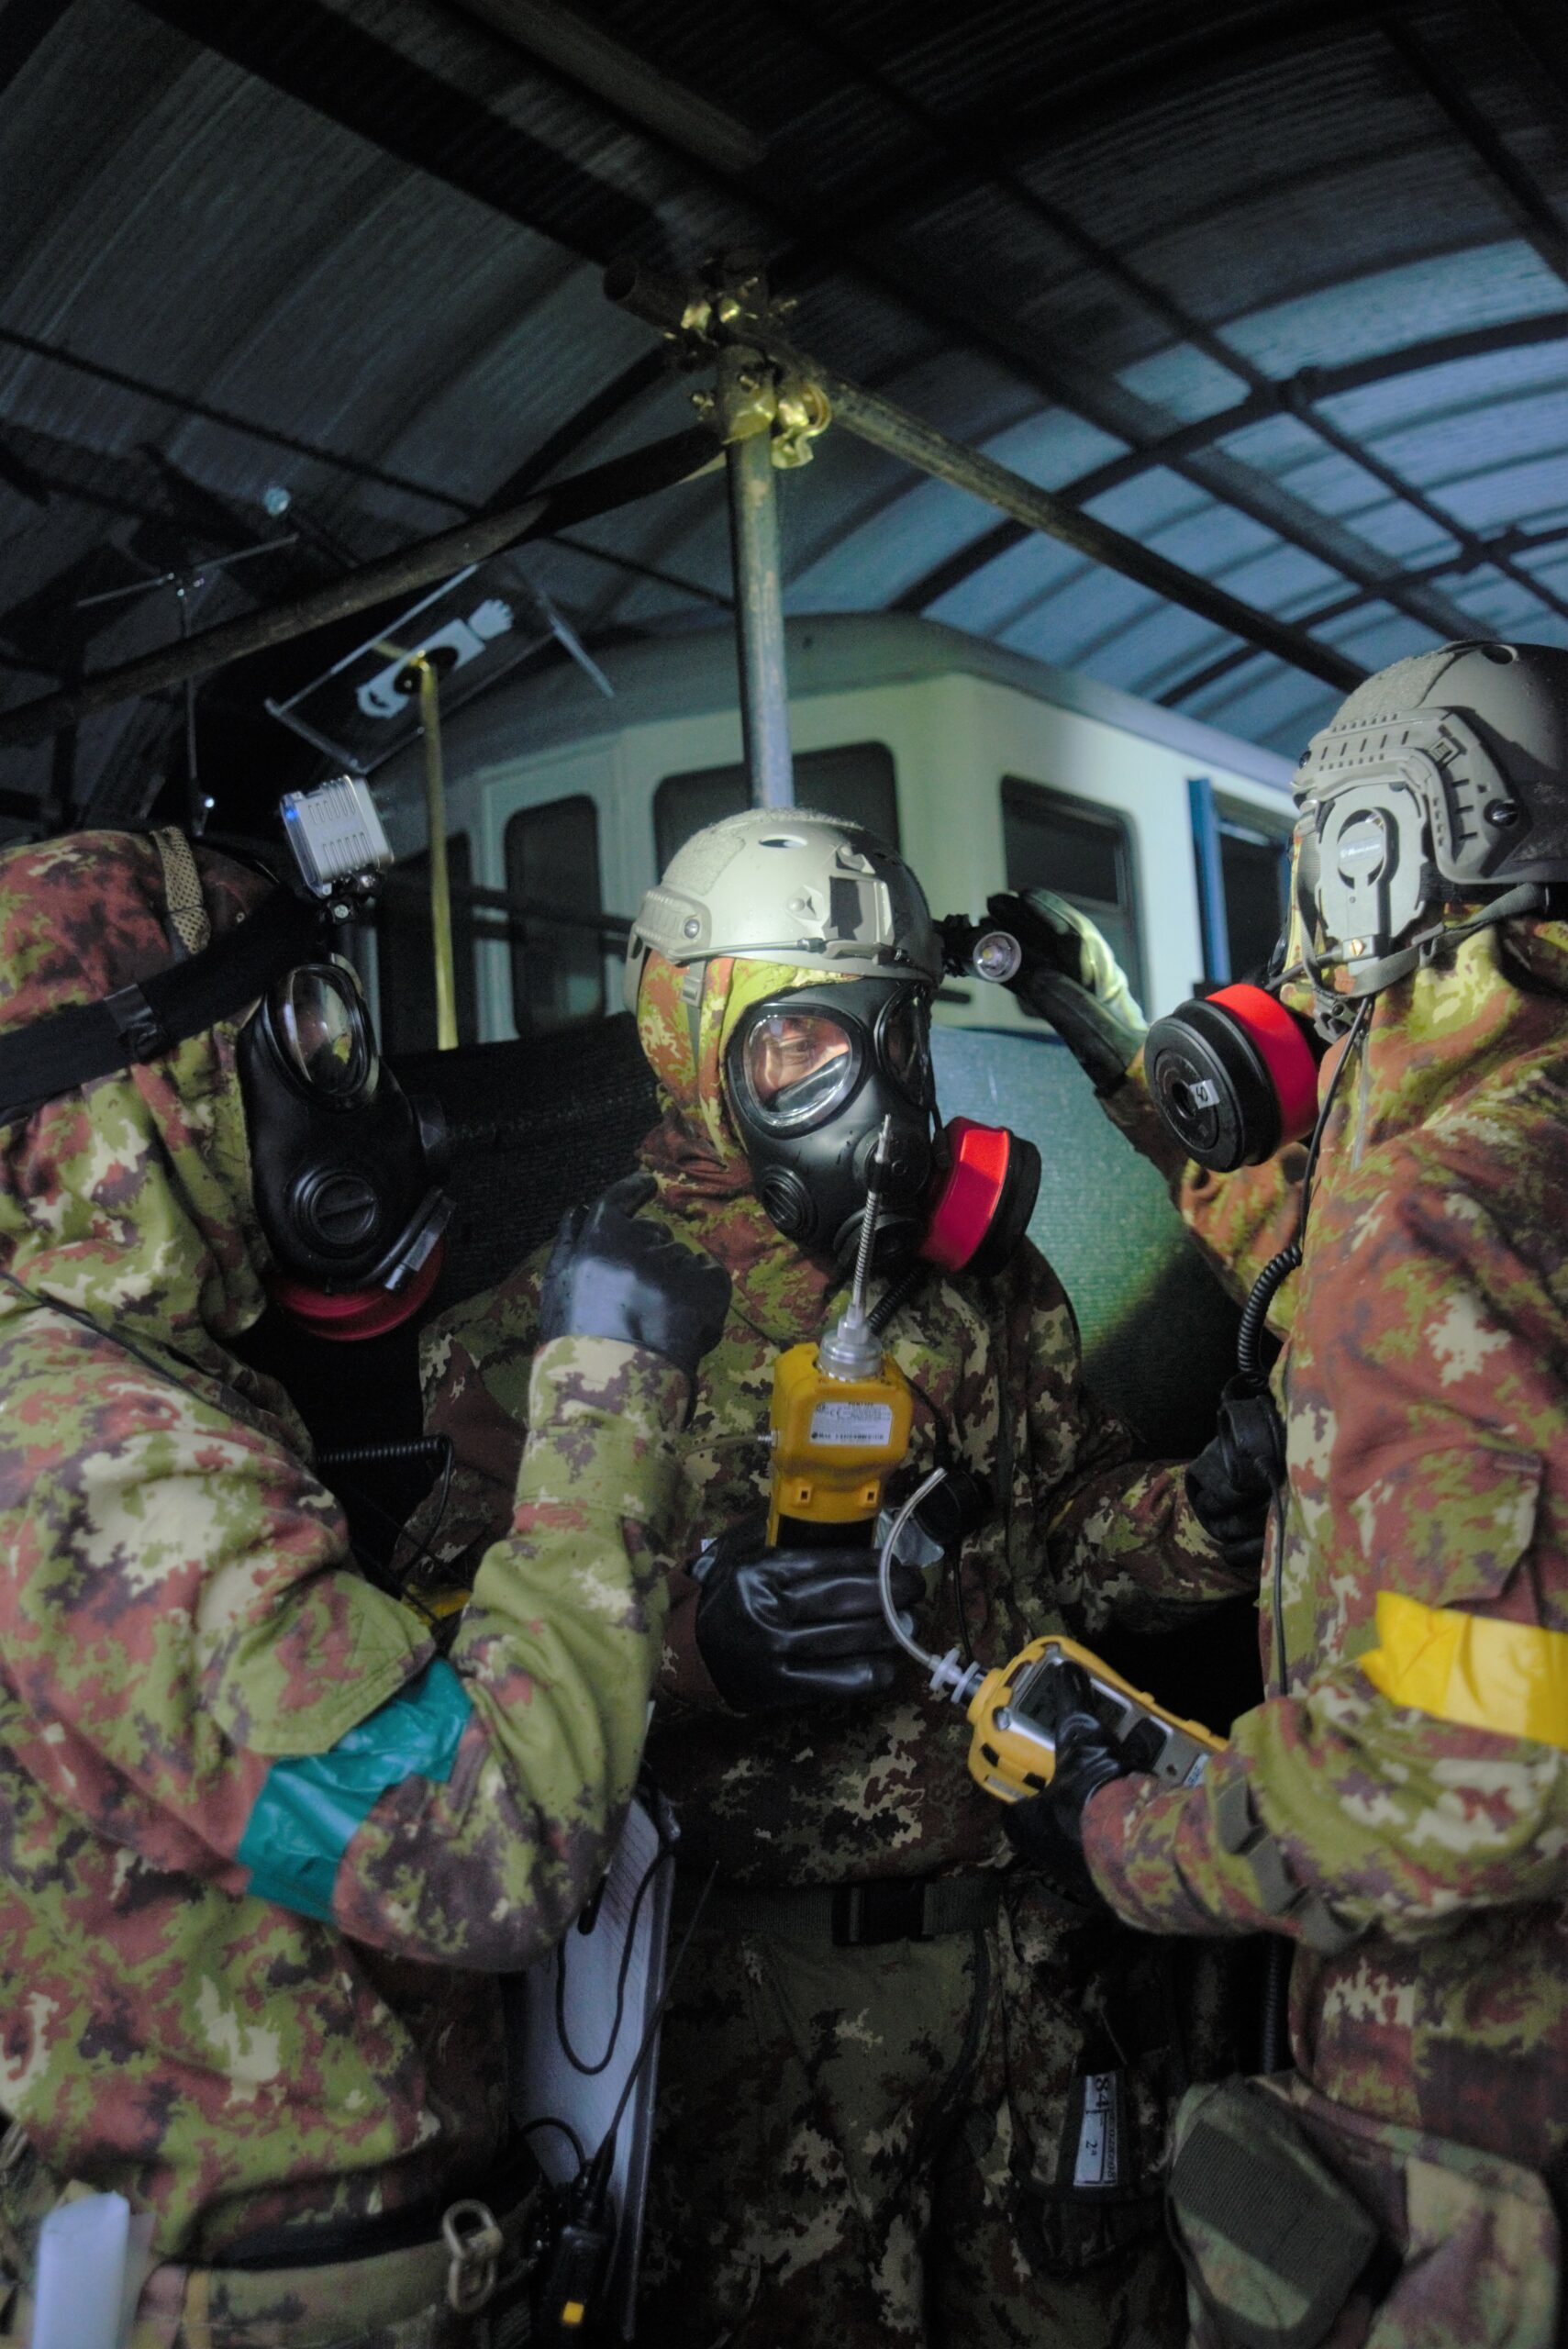 Three Military staff in a uniform wearing a respirator. Two of them are checking the respirator of the man in the middle.